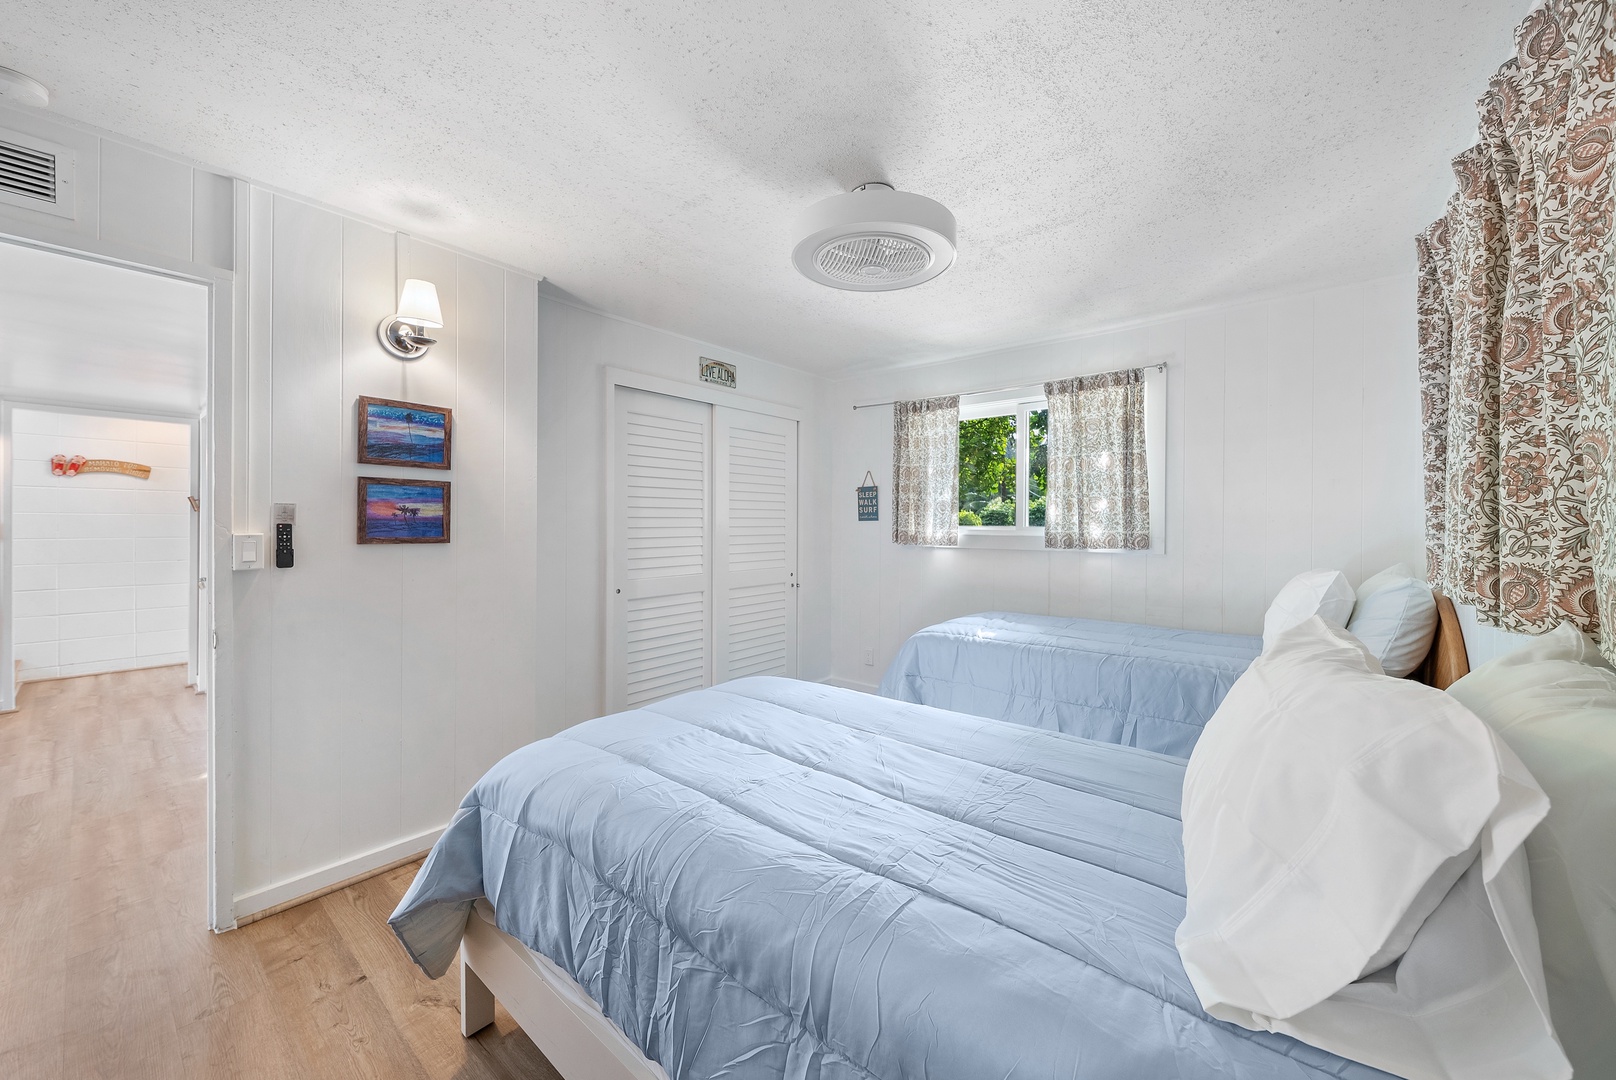 Haleiwa Vacation Rentals, Surfer's Paradise - The perfect space for the kids to get some rest after a day of island fun